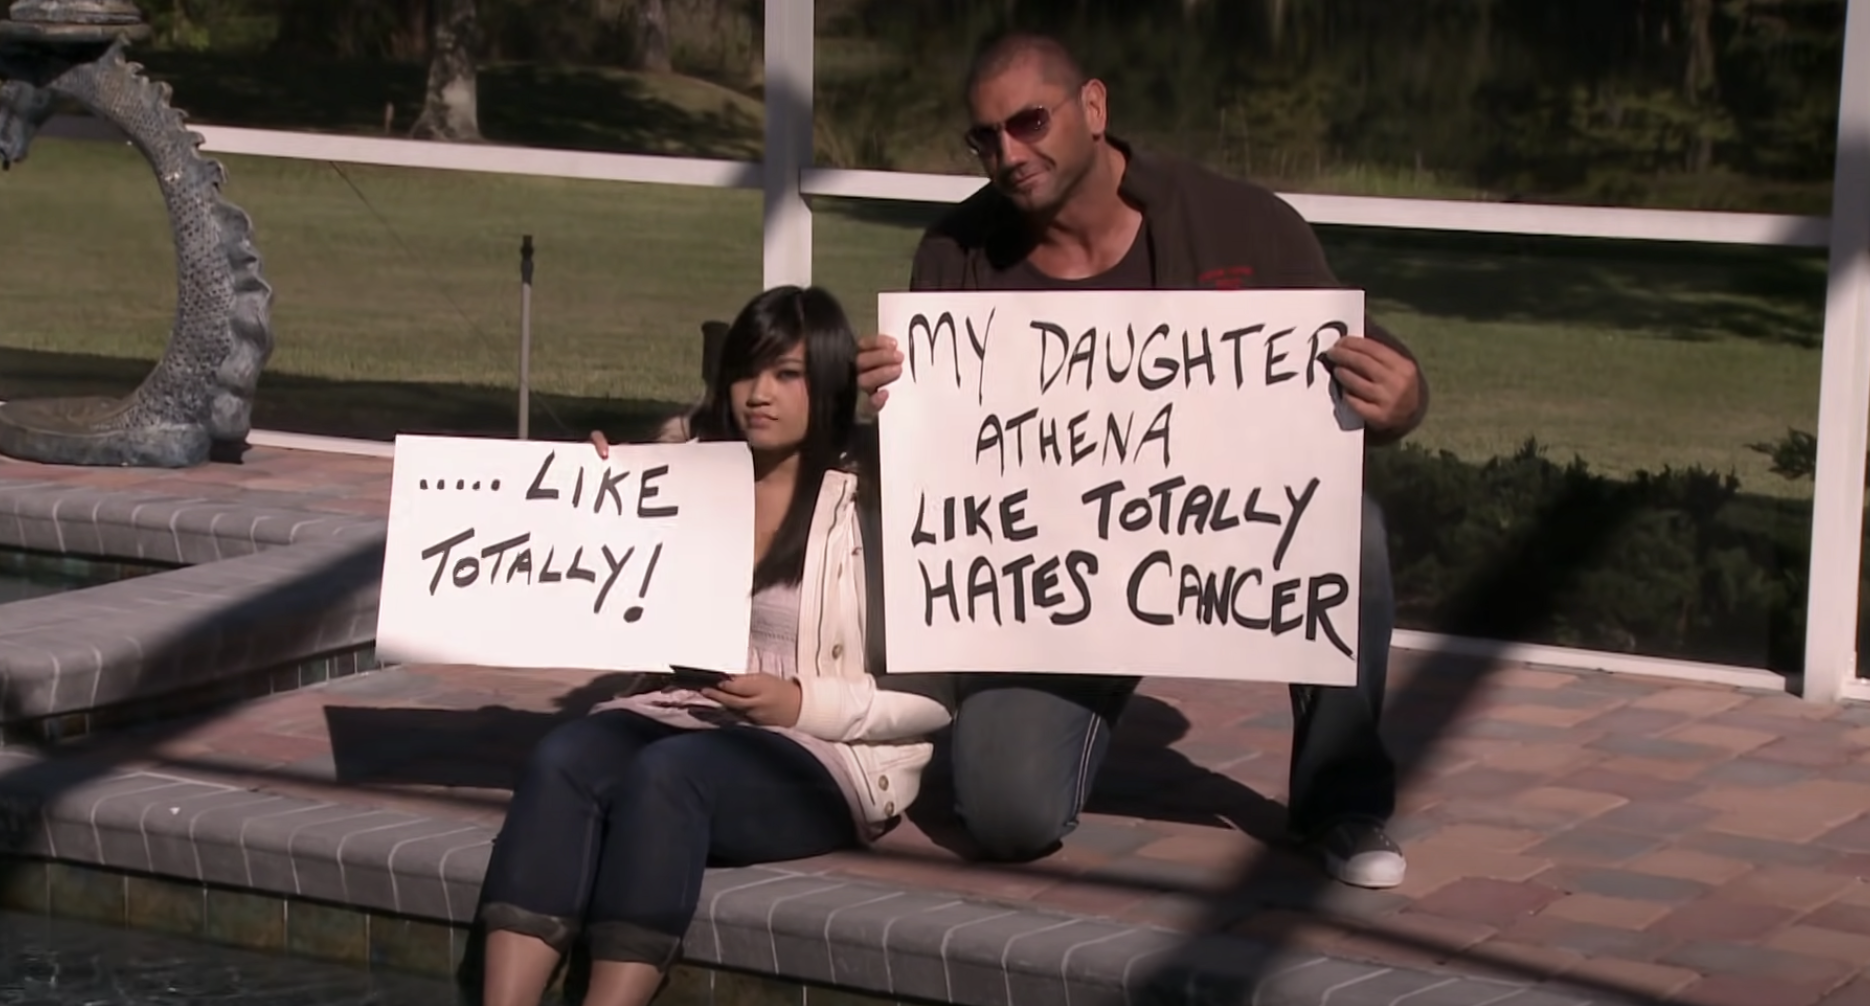 Dave Bautista and his daughter Athena Bautista during the Bautista vs. Cancer campaign. (Source: YouTube)